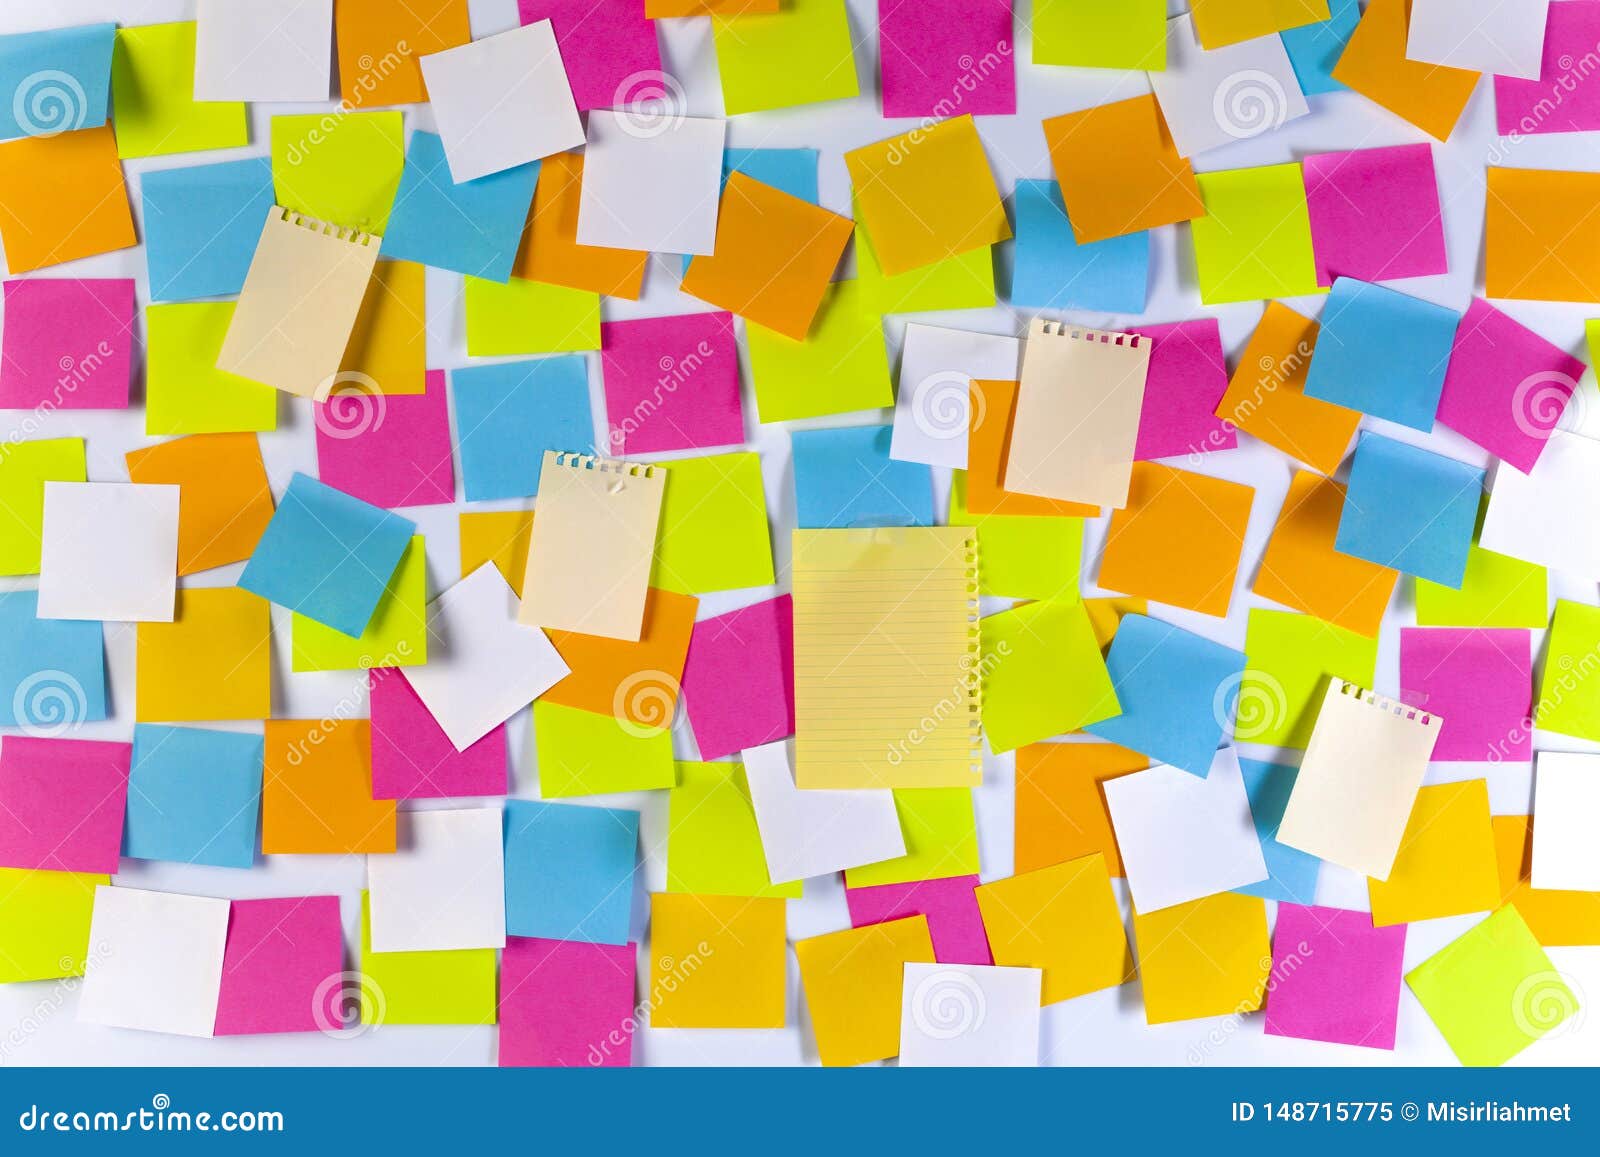 Sticky Note Post it Board Office Stock Image - Image of post, billboard:  148715775